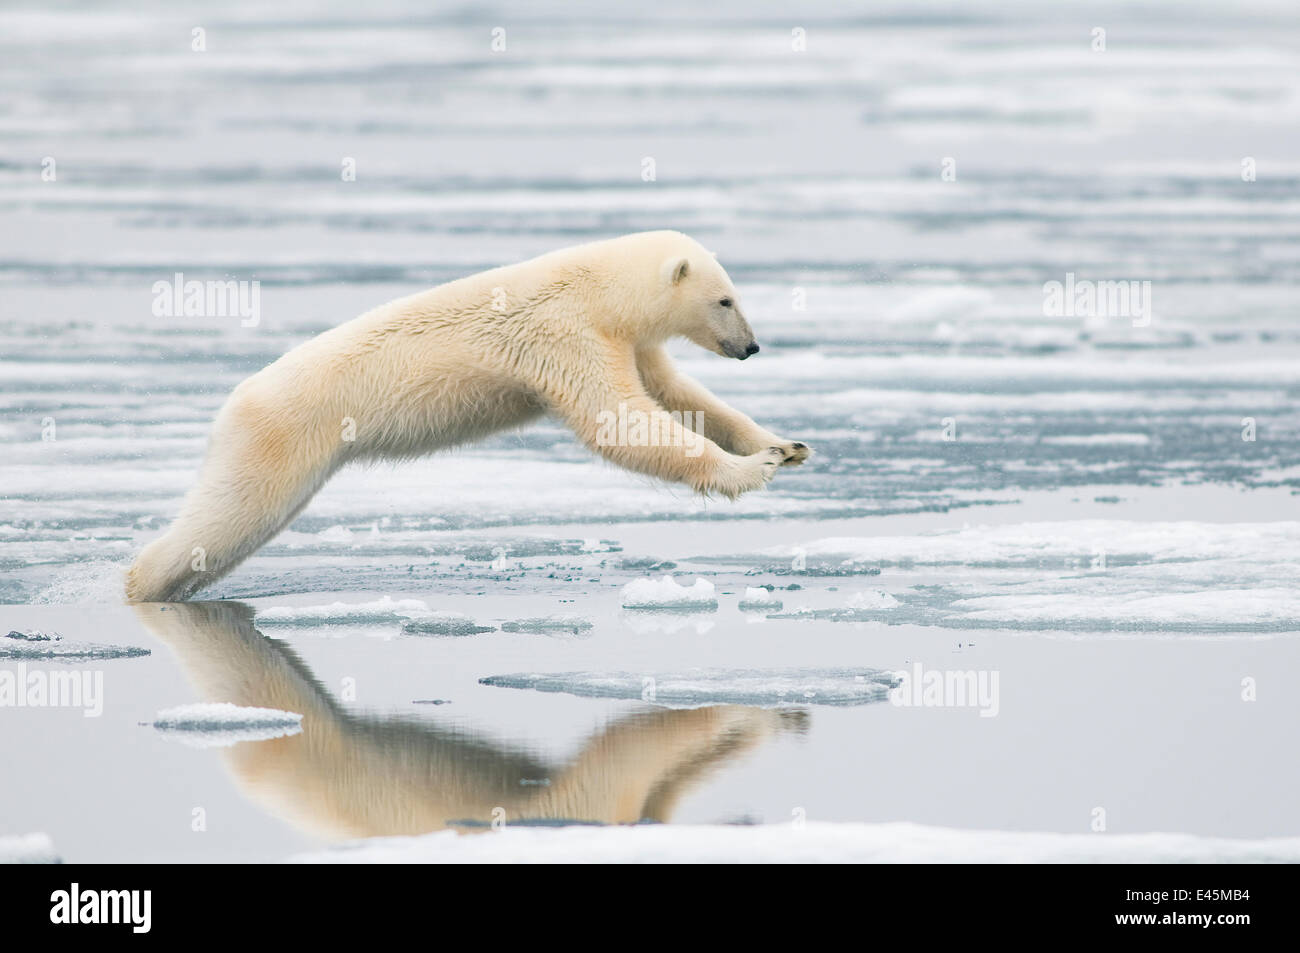 Polar bear (Ursus maritimus) sow jumping while hunting for seals on sea ice, off the coast of Svalbard, Norway Stock Photo